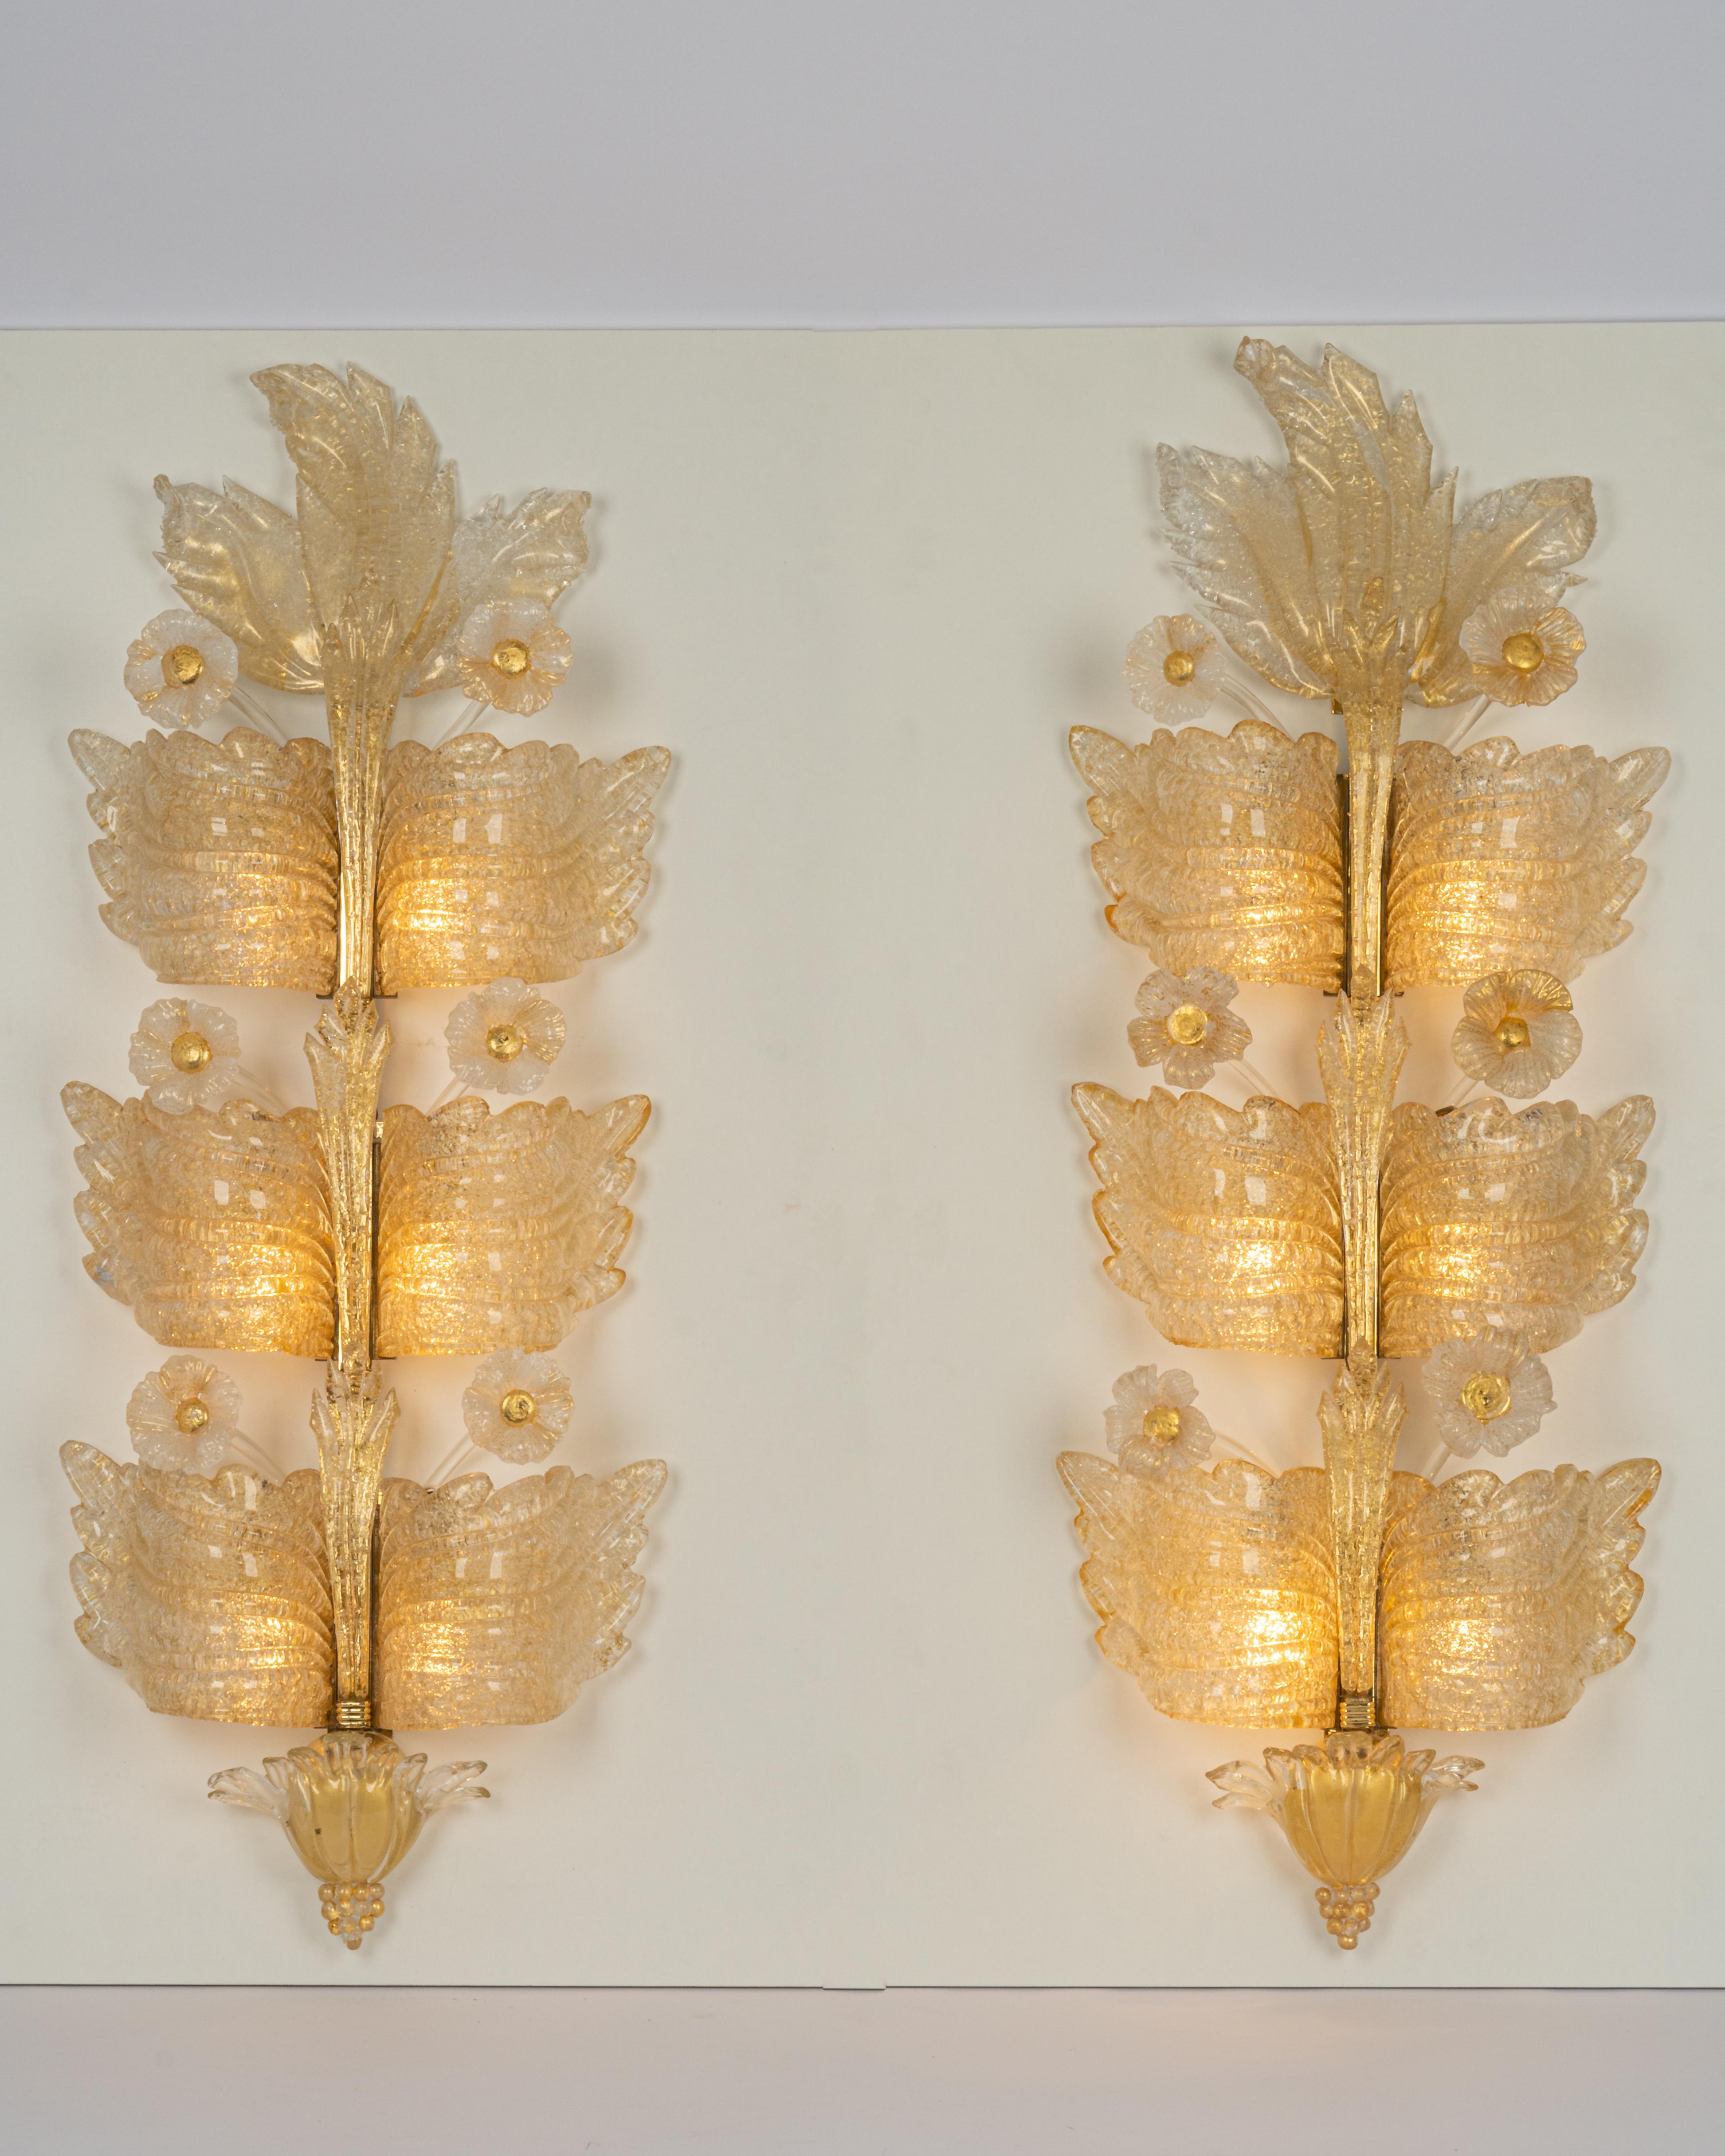 A gorgeous set of 2 sconces with 24-karat gold made by Barovier & Toso, Italy, circa 1970-1979.
High quality, Hand made, and in very good condition. Cleaned, well-wired, and ready to use.

Each sconce requires 6 x E14 standard bulbs with 60 W